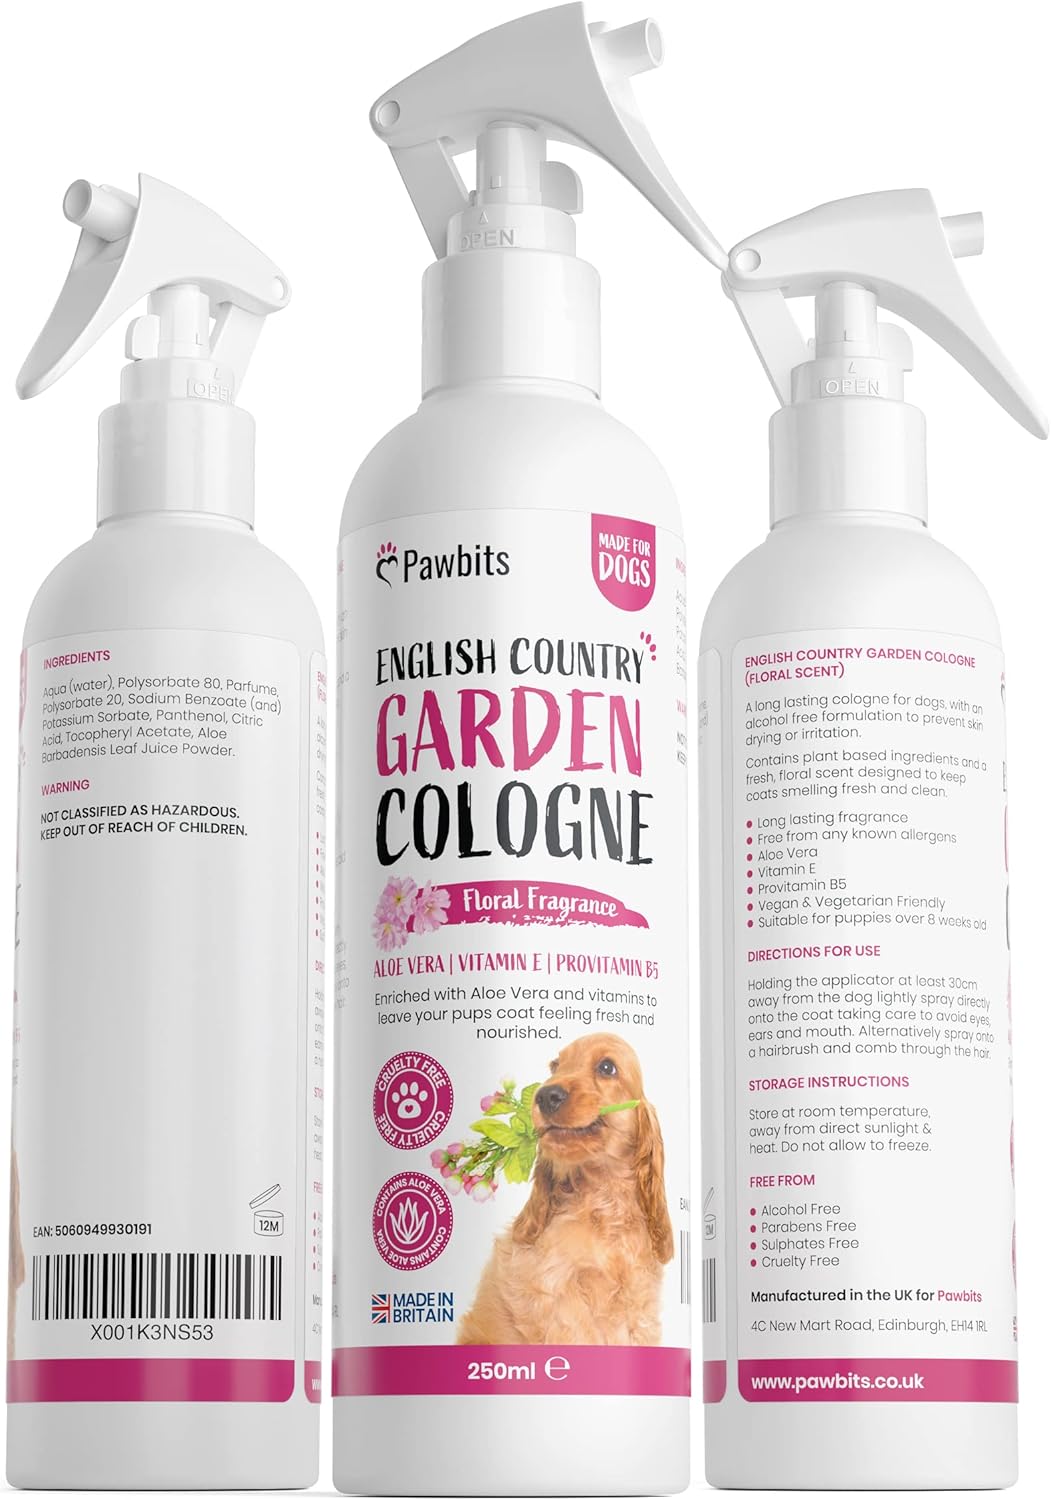 English Country Garden Floral Scented Cologne for Dogs 250ml - Alcohol-Free Dog Deodoriser Spray with Vitamin E and Pro-vitamin B5 - Dog-Friendly Odour Eliminating Perfume :Pet Supplies